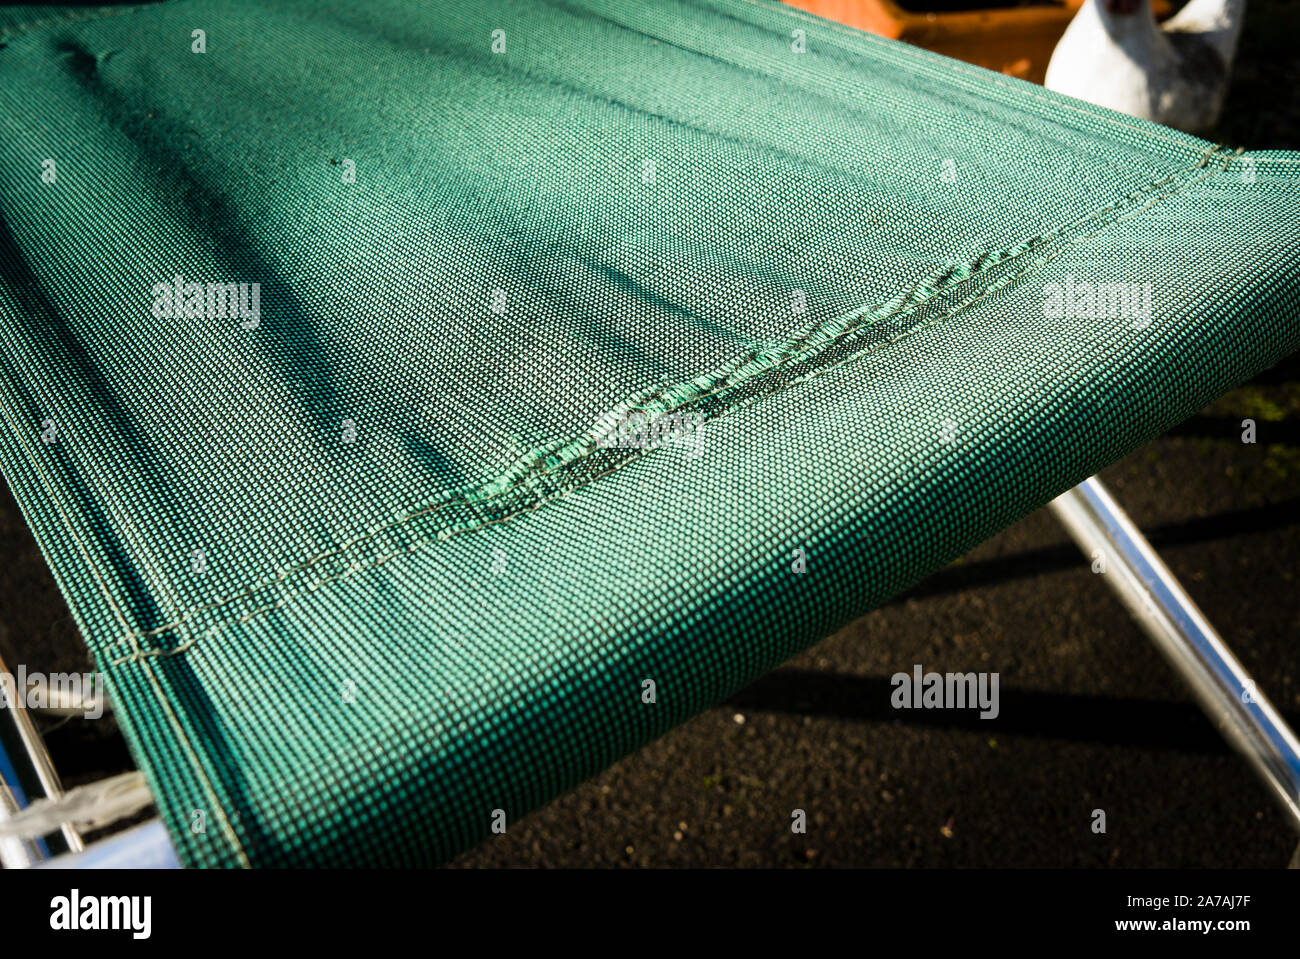 The fabric of a folding garden chair shows deterioration rendering it unsafe for further use Stock Photo